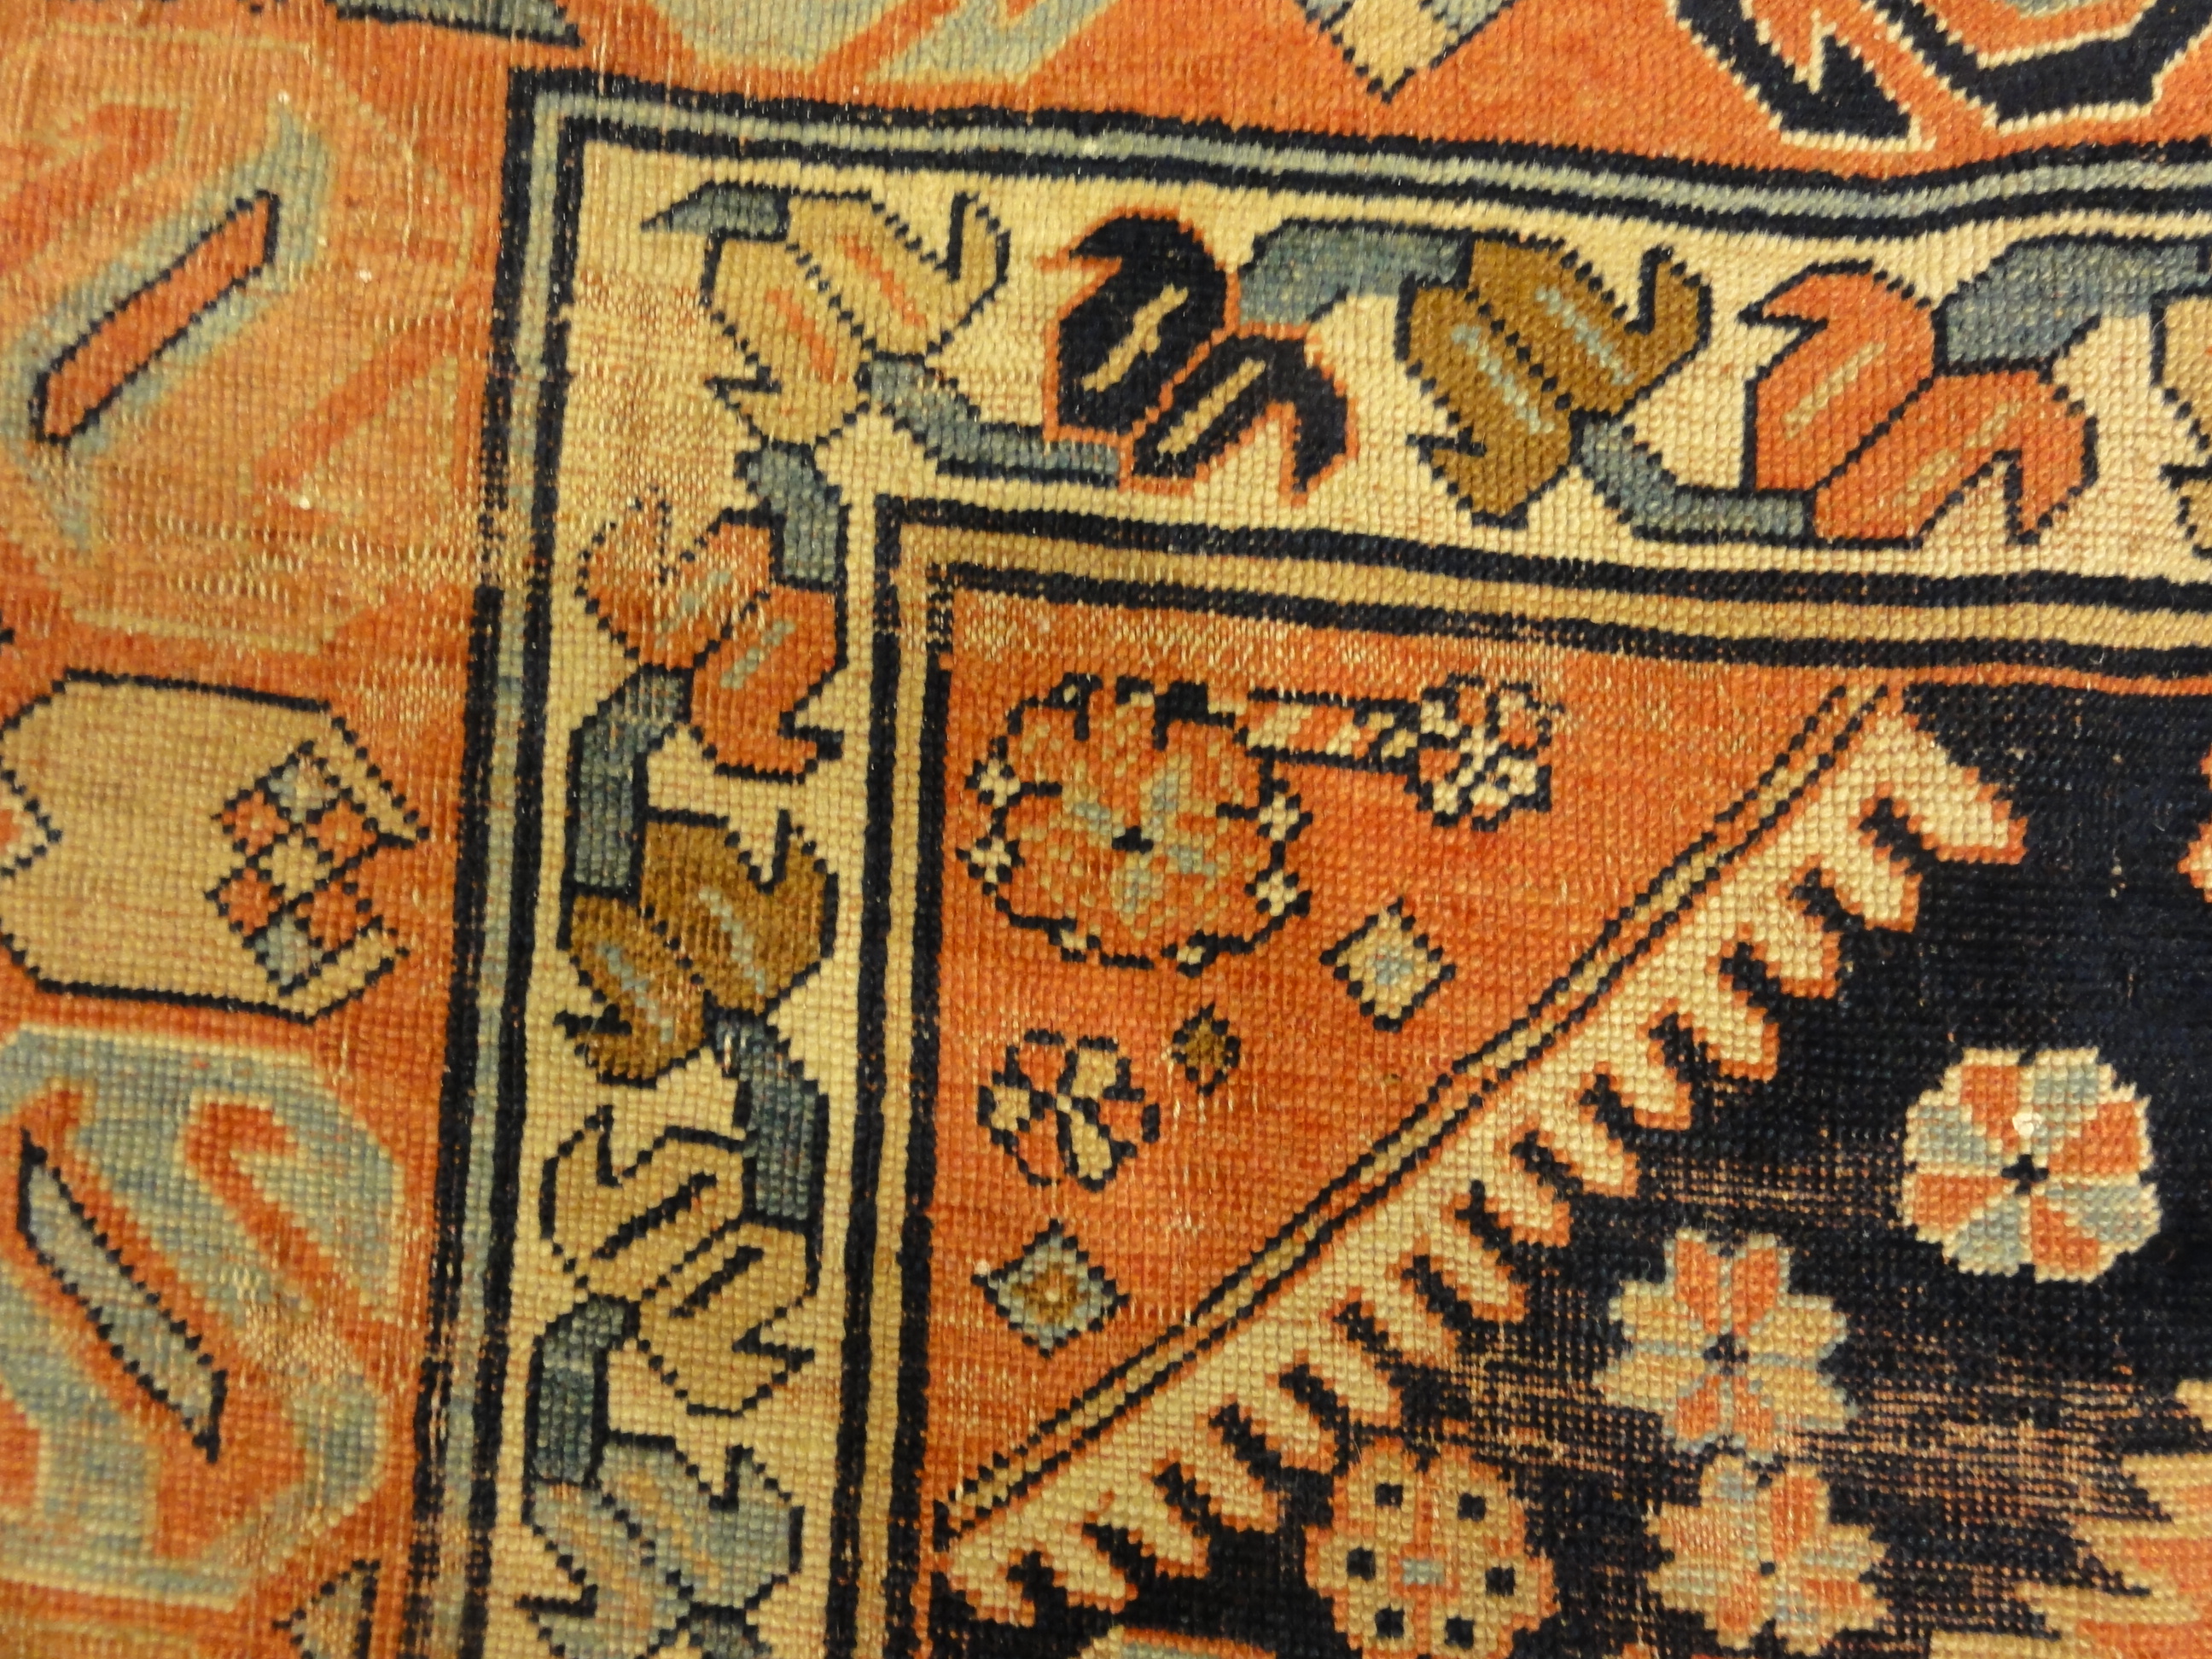 Antique Proto Kurdish Rug Early 19th Century. A piece of genuine authentic woven carpet art sold by Santa Barbara Design Center Rugs and More.